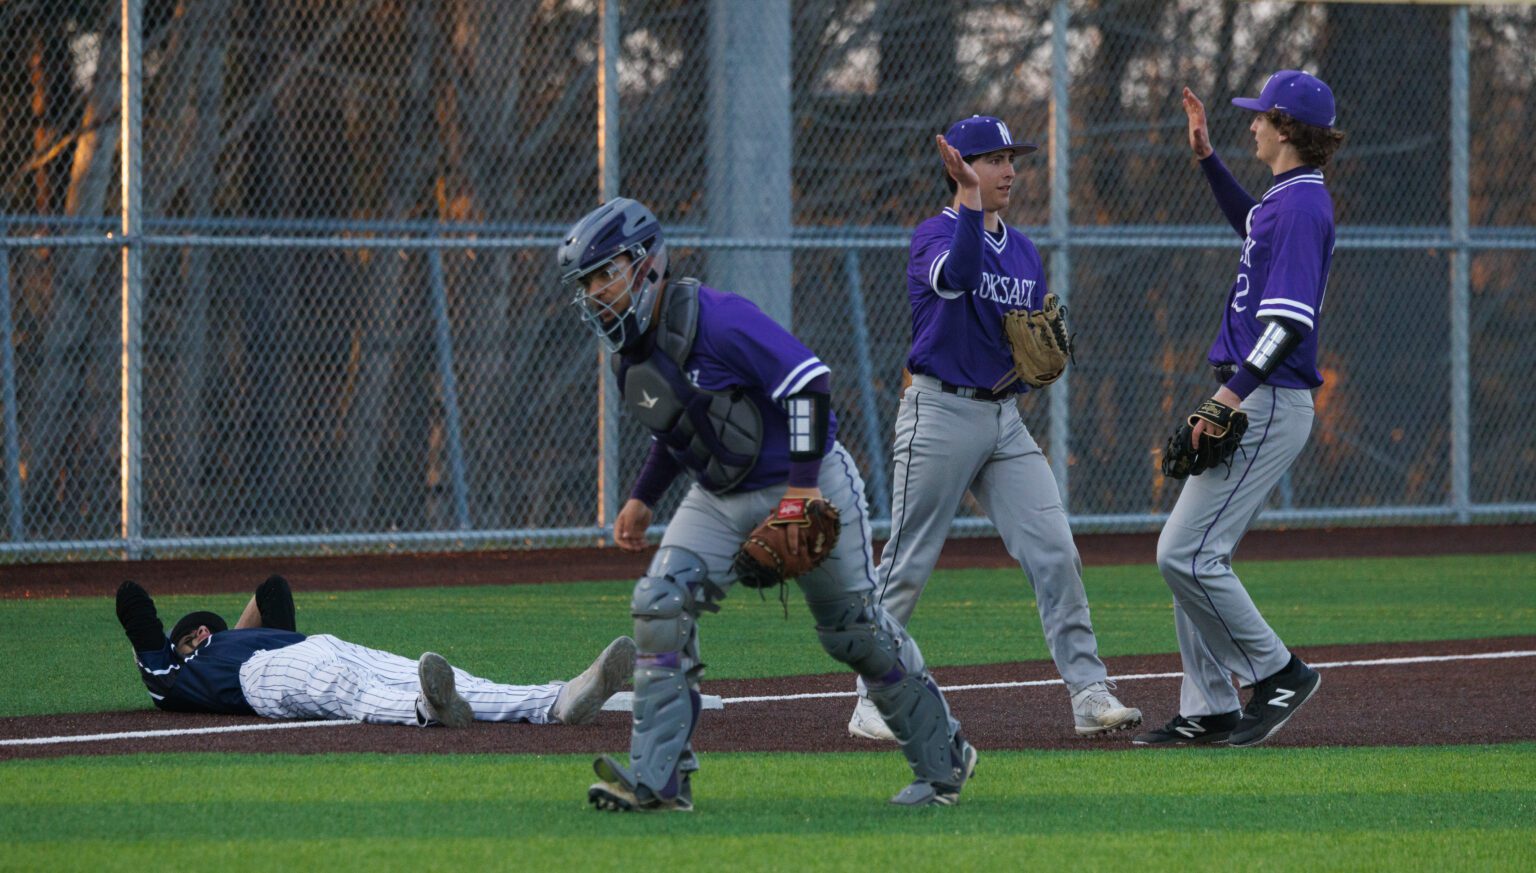 Nooksack Valley’s Matthew Blake and Bennett DeLange high-five April 12 after catching Squalicum’s Chase Anderson in a rundown at third base in the seventh inning. Nooksack Valley beat Squalicum 4-1 in Bellingham.